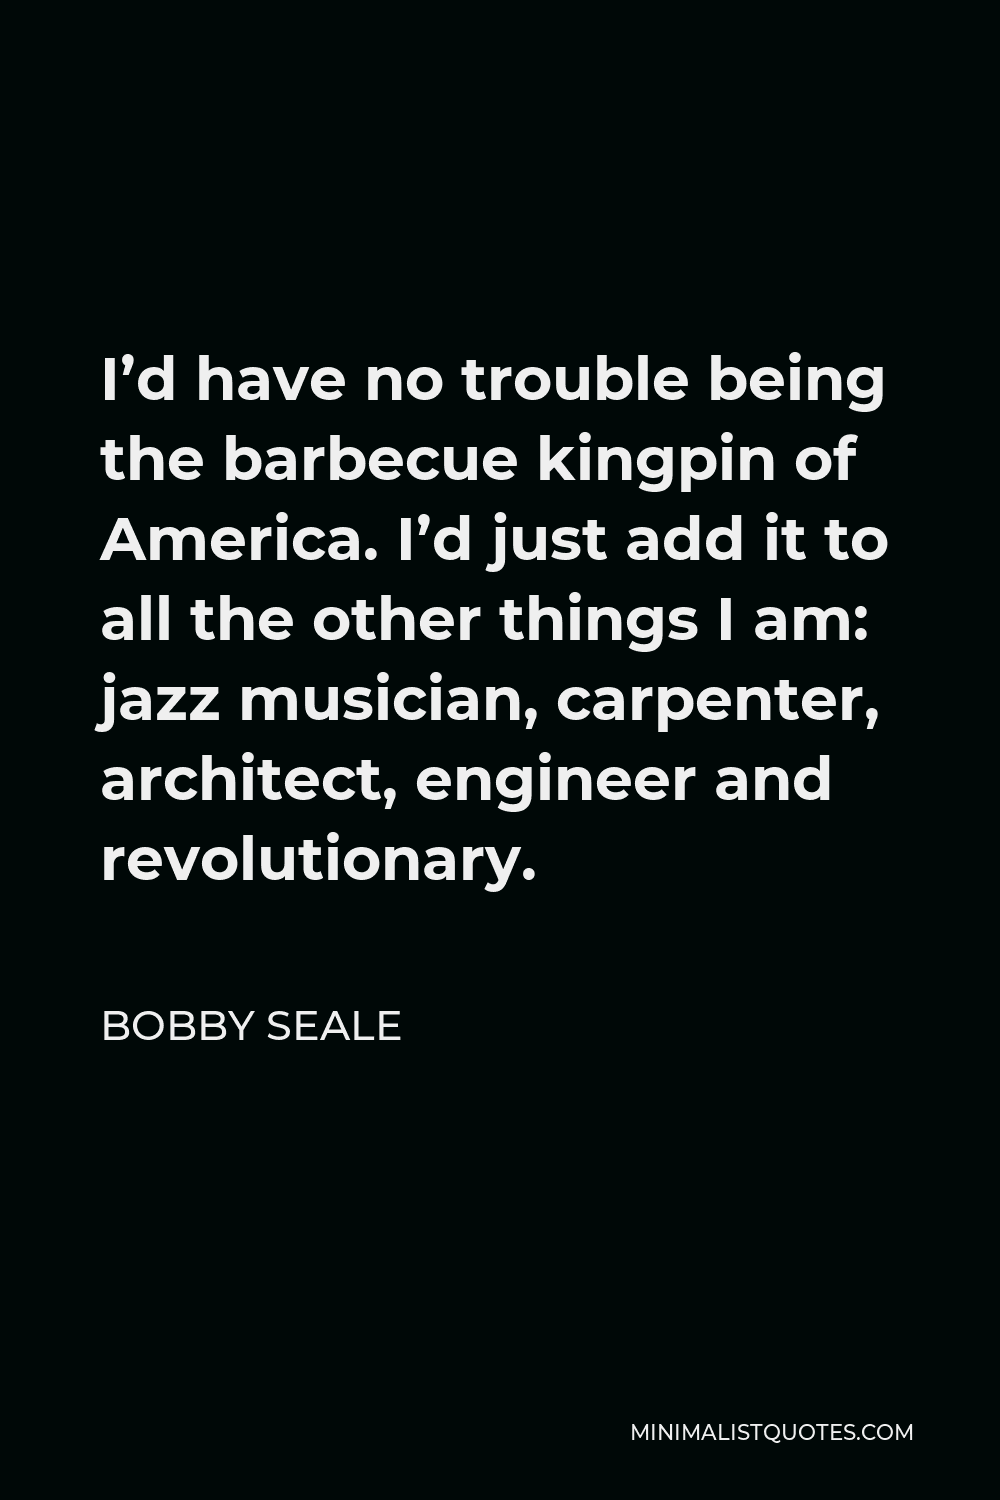 Bobby Seale Quote - I’d have no trouble being the barbecue kingpin of America. I’d just add it to all the other things I am: jazz musician, carpenter, architect, engineer and revolutionary.